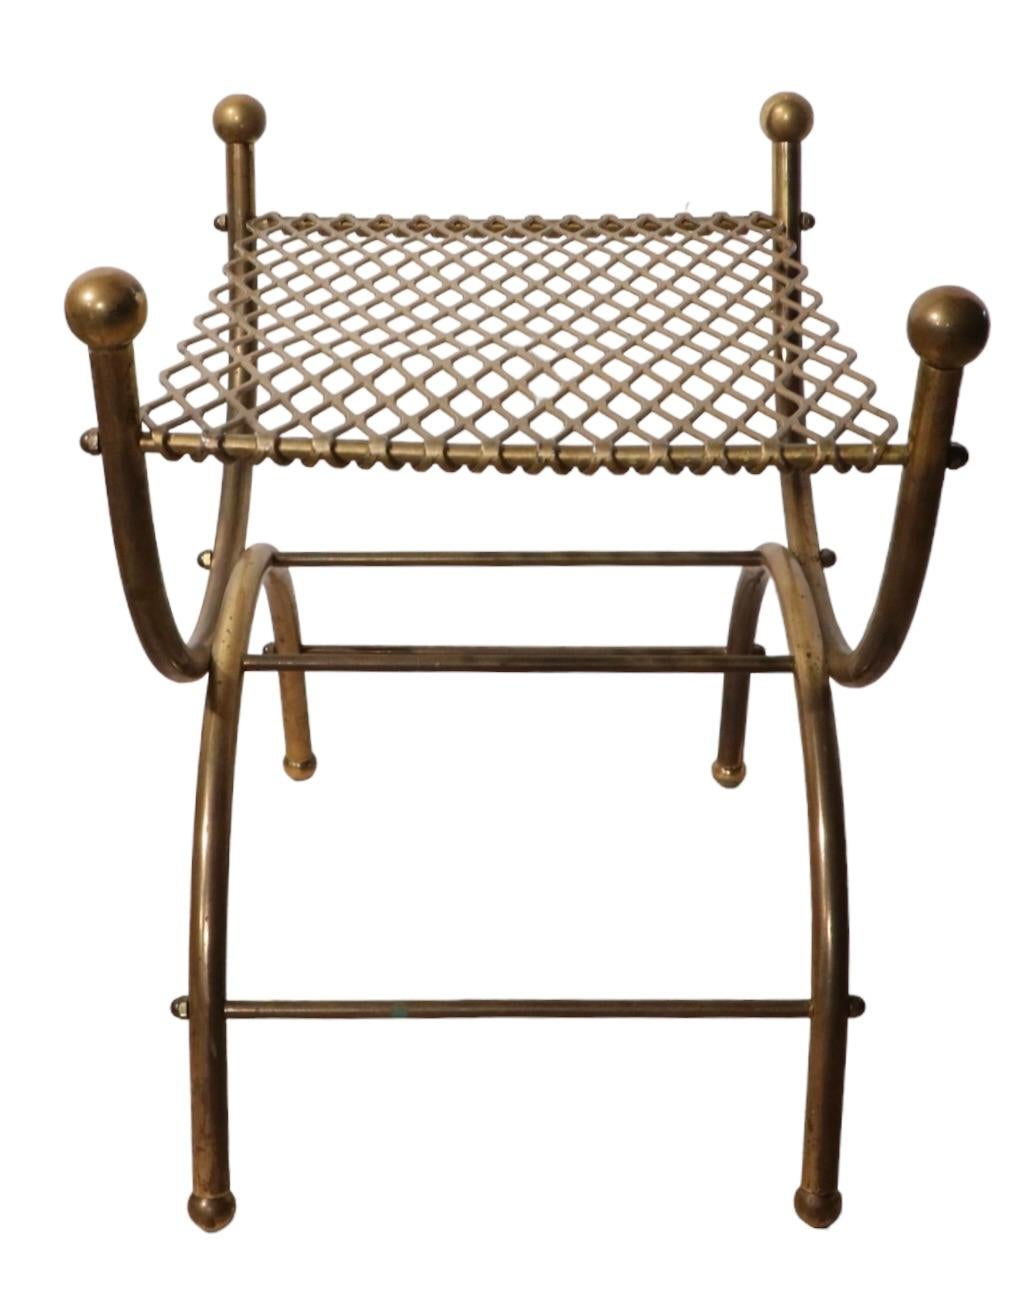 American Diminutive Hollywood Regency Stool Bench of Brass and Steel For Sale